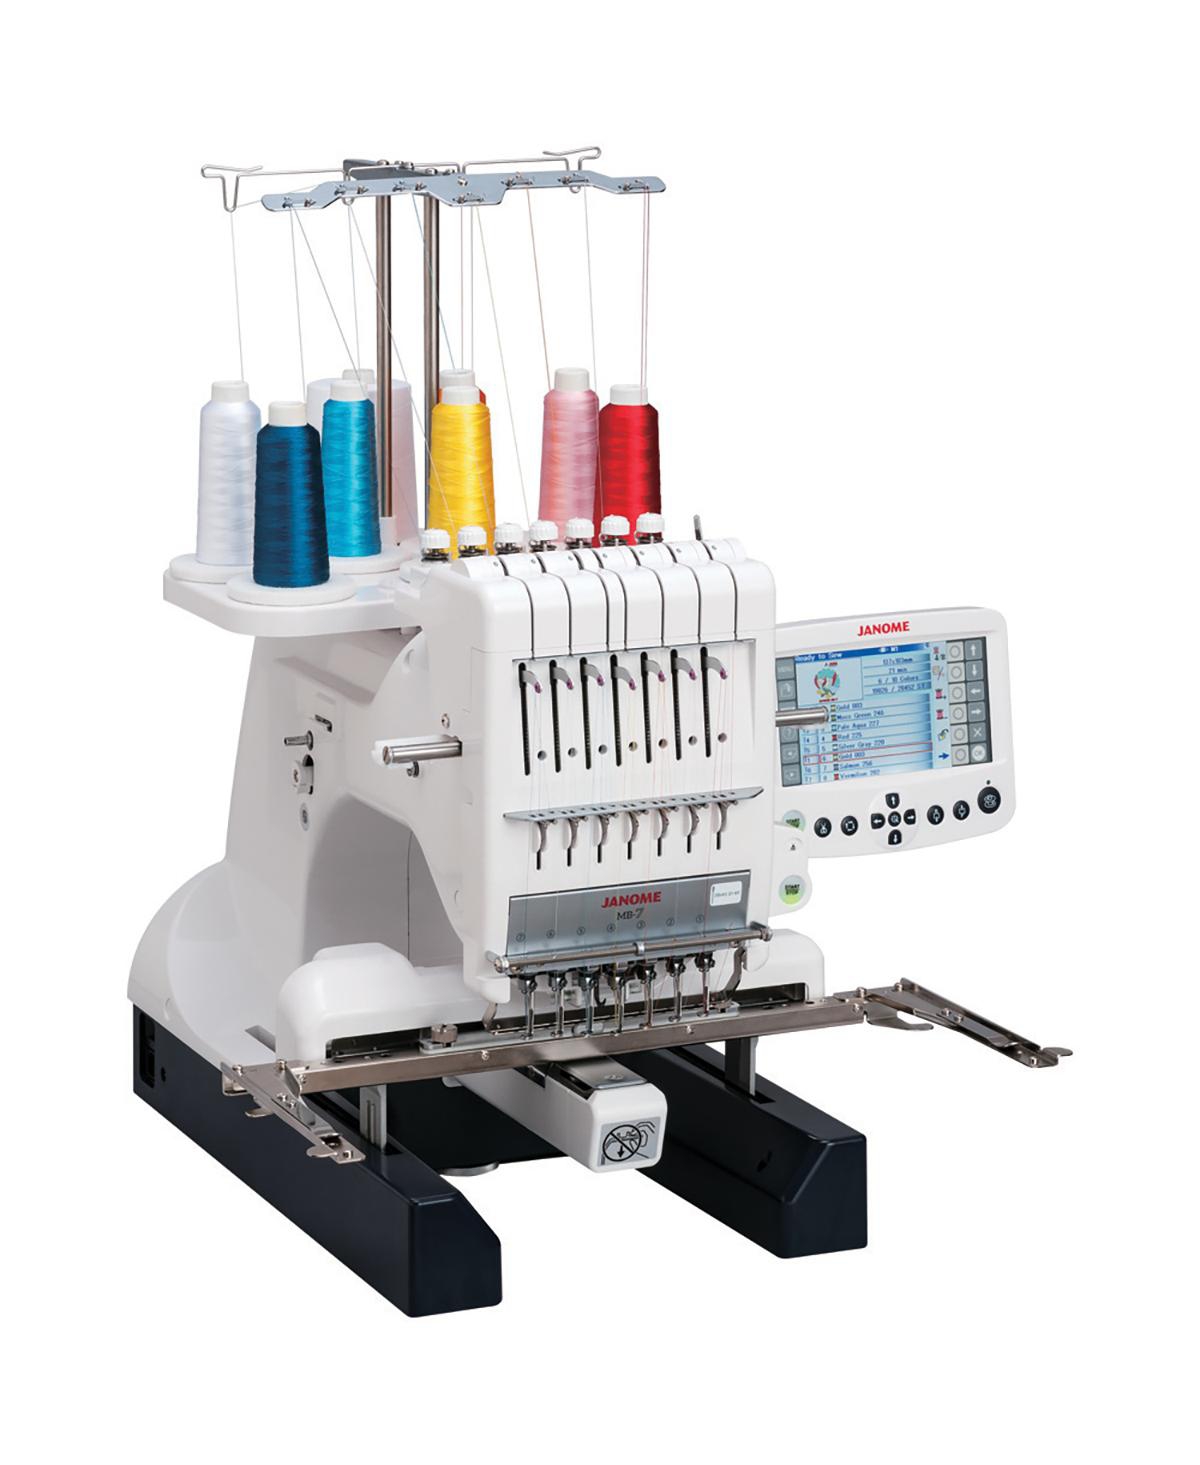 MB7 Multi-Needle Computerized Embroidery Sewing Machine - White